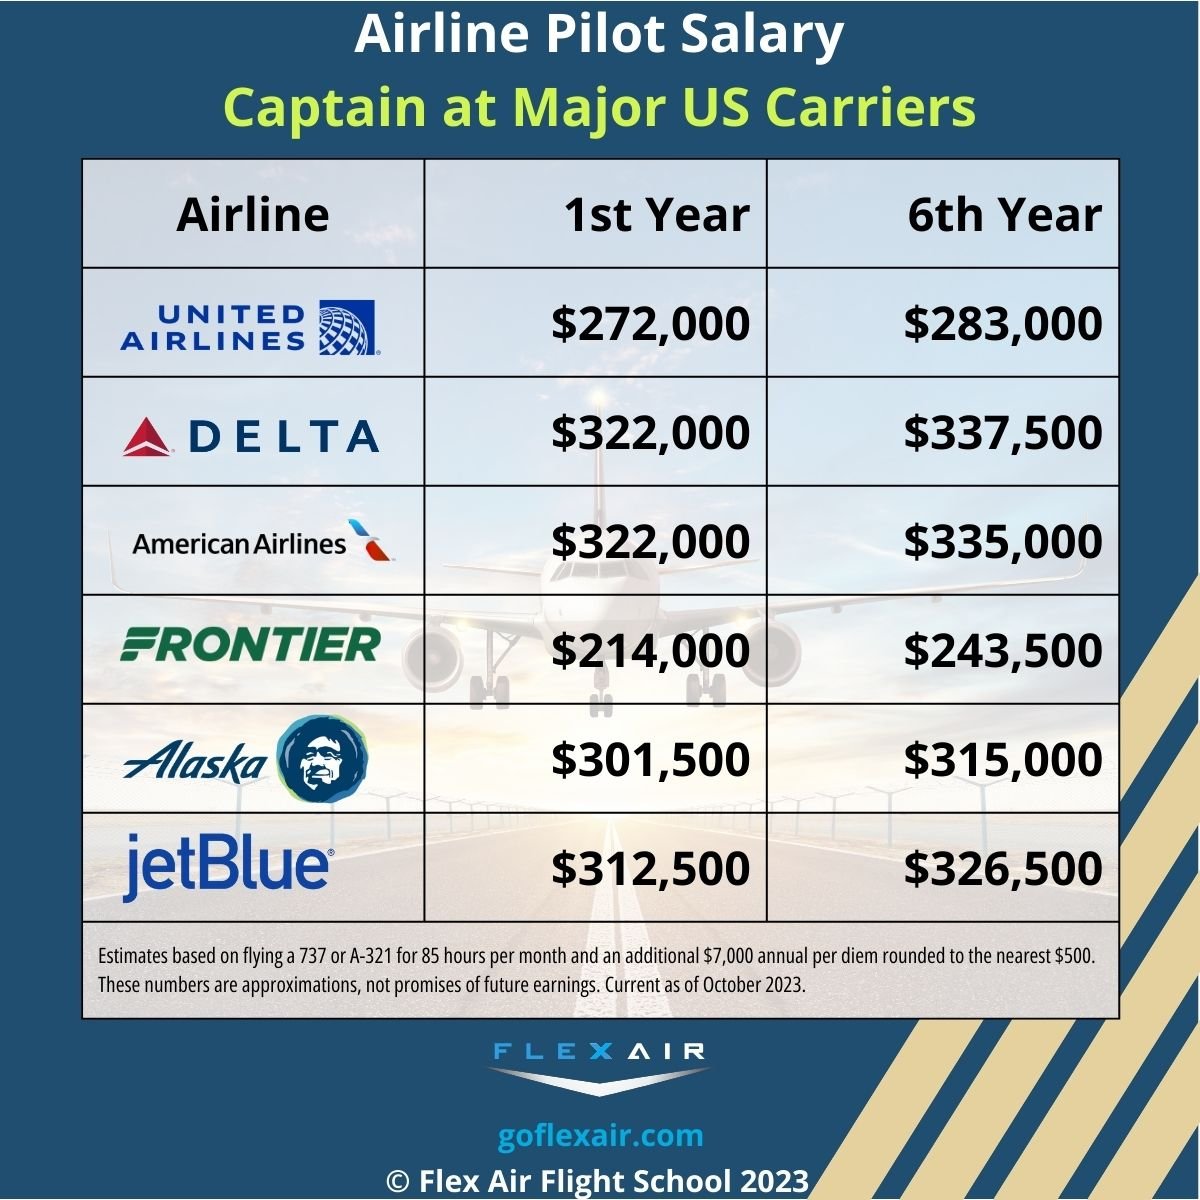 Airline Pilot Salary 2023: How Much do Pilots Make?